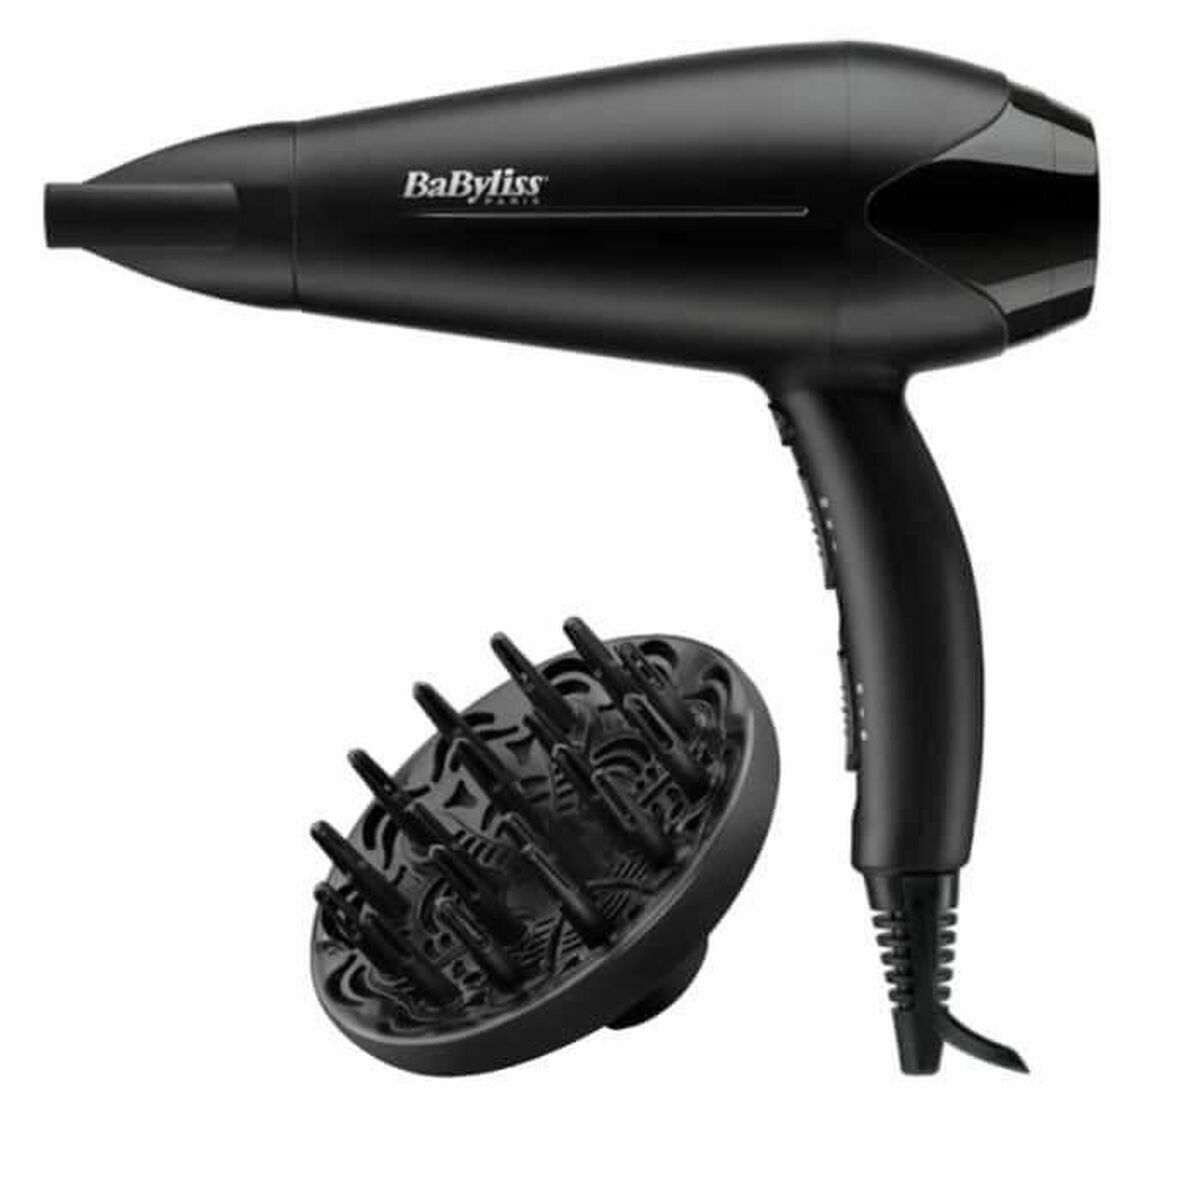 Phon Babyliss Power Dry 2100 2100 W